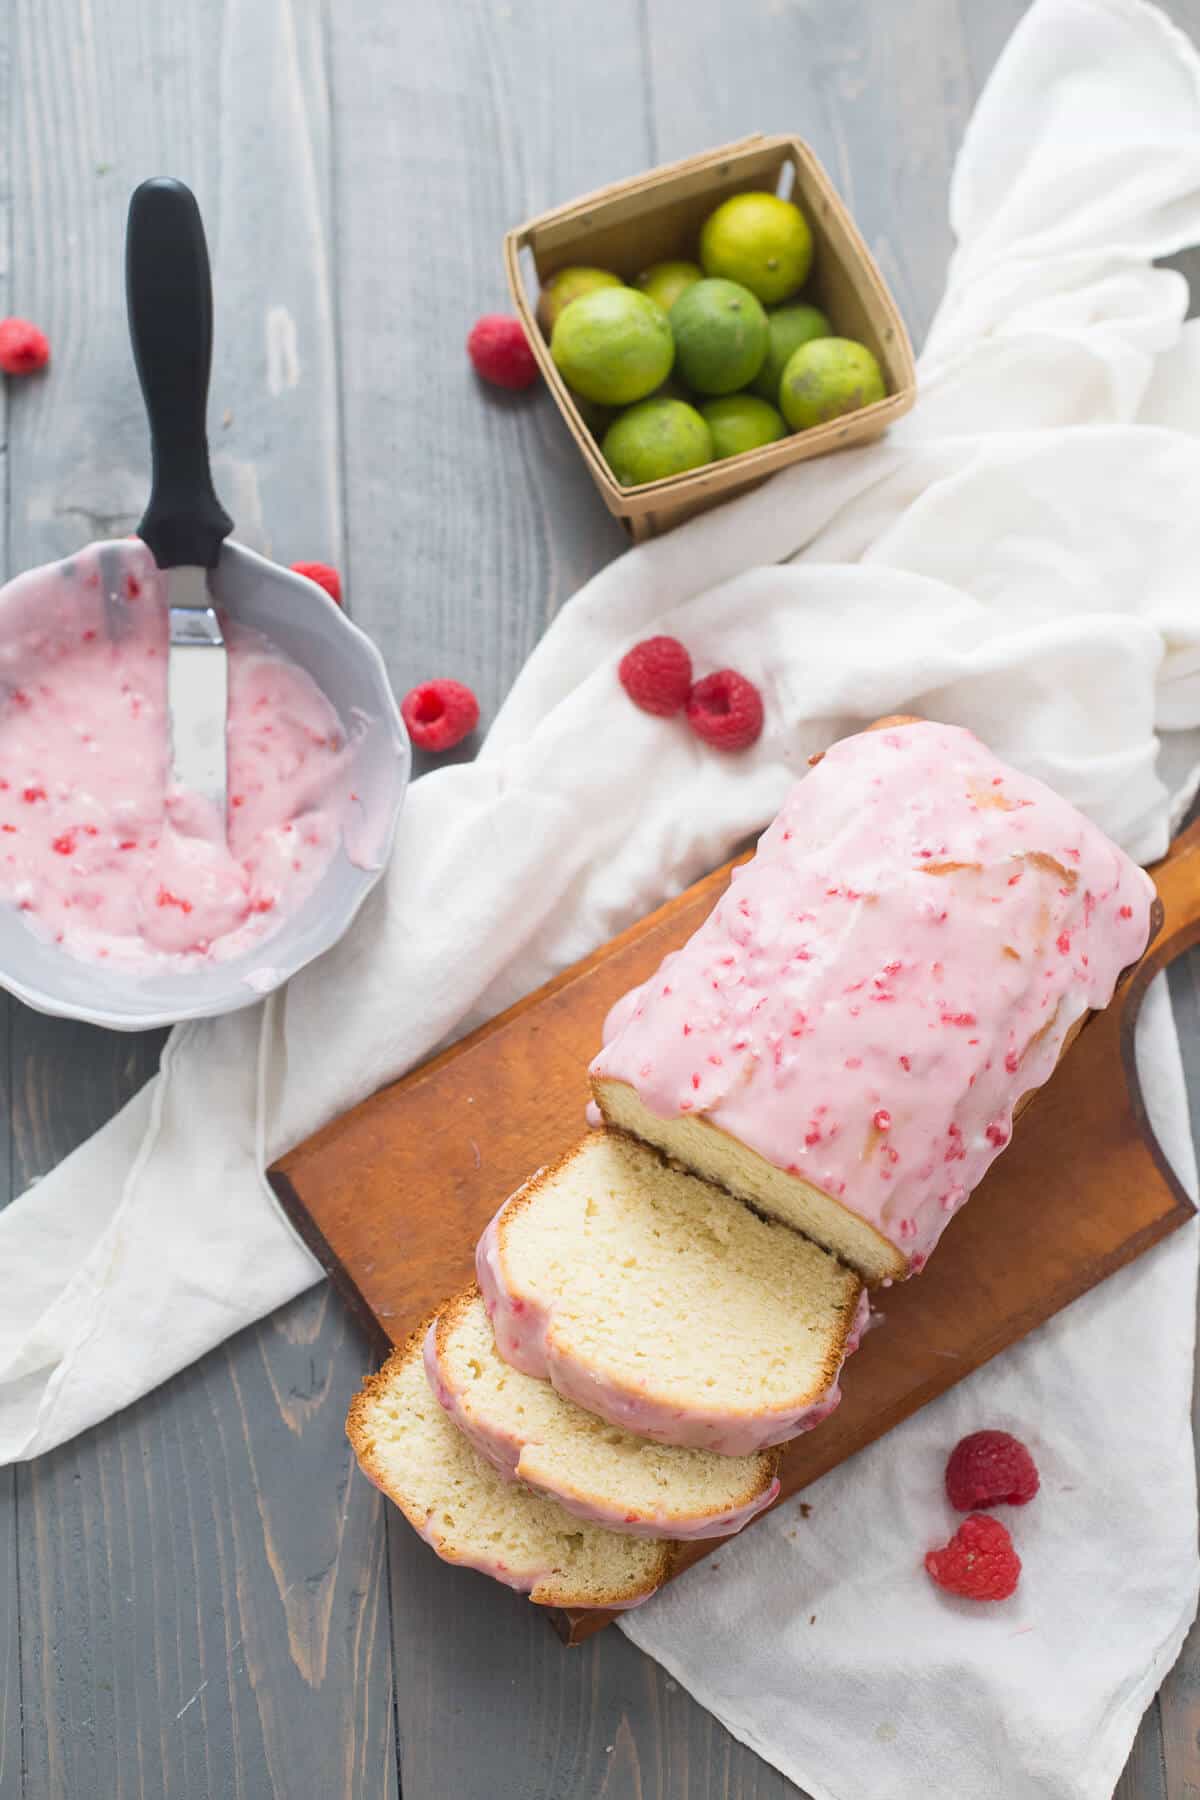 This key lime cake is simple but don't let dissuade you! The tangy cake tastes amazing with the homemade raspberry glaze! lemonsforlulu.com